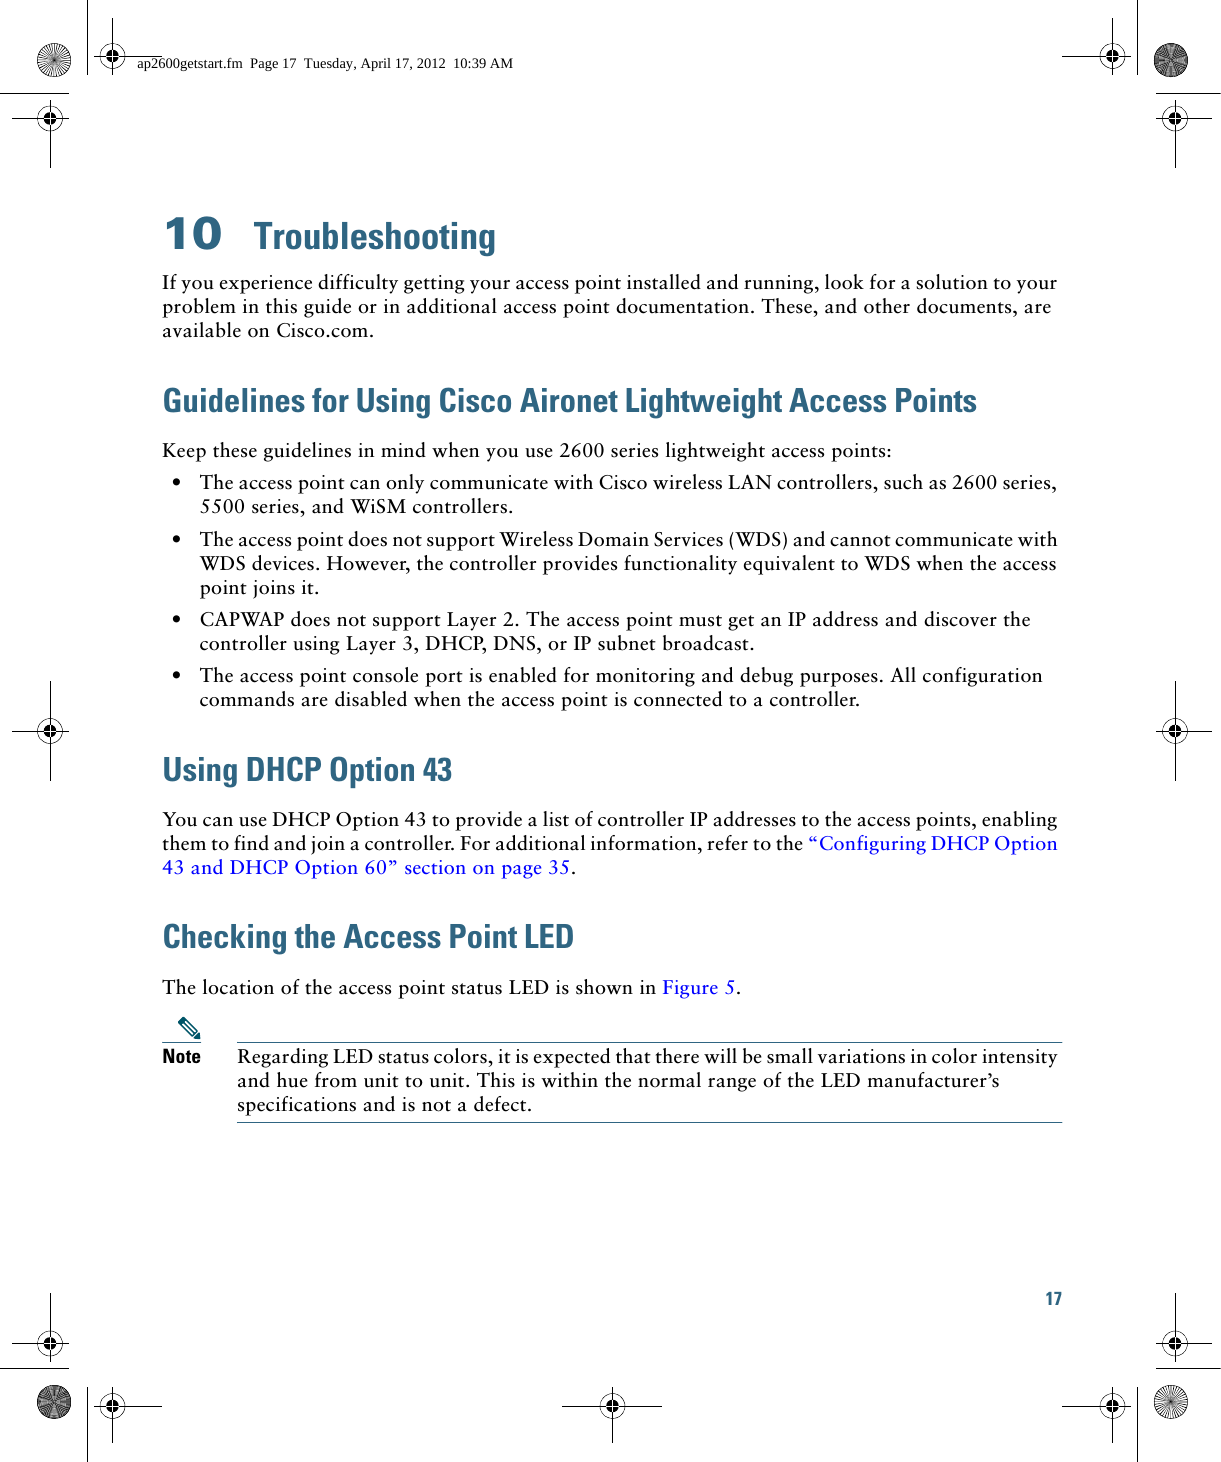 17 10  TroubleshootingIf you experience difficulty getting your access point installed and running, look for a solution to your problem in this guide or in additional access point documentation. These, and other documents, are available on Cisco.com.Guidelines for Using Cisco Aironet Lightweight Access PointsKeep these guidelines in mind when you use 2600 series lightweight access points:  • The access point can only communicate with Cisco wireless LAN controllers, such as 2600 series, 5500 series, and WiSM controllers.  • The access point does not support Wireless Domain Services (WDS) and cannot communicate with WDS devices. However, the controller provides functionality equivalent to WDS when the access point joins it.  • CAPWAP does not support Layer 2. The access point must get an IP address and discover the controller using Layer 3, DHCP, DNS, or IP subnet broadcast.  • The access point console port is enabled for monitoring and debug purposes. All configuration commands are disabled when the access point is connected to a controller. Using DHCP Option 43You can use DHCP Option 43 to provide a list of controller IP addresses to the access points, enabling them to find and join a controller. For additional information, refer to the “Configuring DHCP Option 43 and DHCP Option 60” section on page 35.Checking the Access Point LEDThe location of the access point status LED is shown in Figure 5.Note Regarding LED status colors, it is expected that there will be small variations in color intensity and hue from unit to unit. This is within the normal range of the LED manufacturer’s specifications and is not a defect.ap2600getstart.fm  Page 17  Tuesday, April 17, 2012  10:39 AM